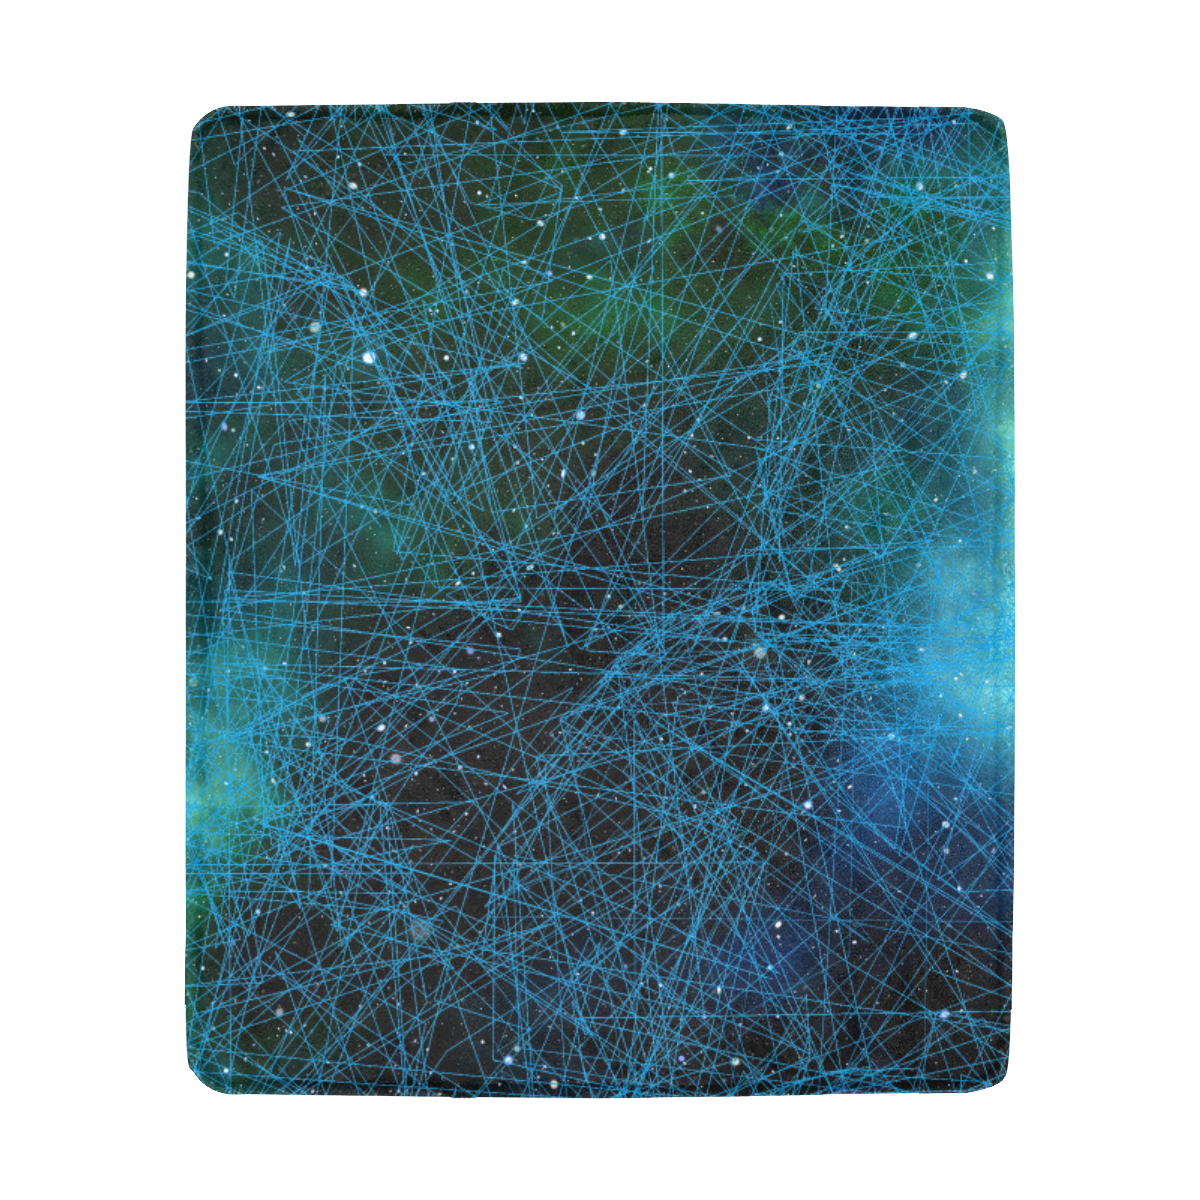 System Network Connection Ultra-Soft Micro Fleece Blanket 50"x60"